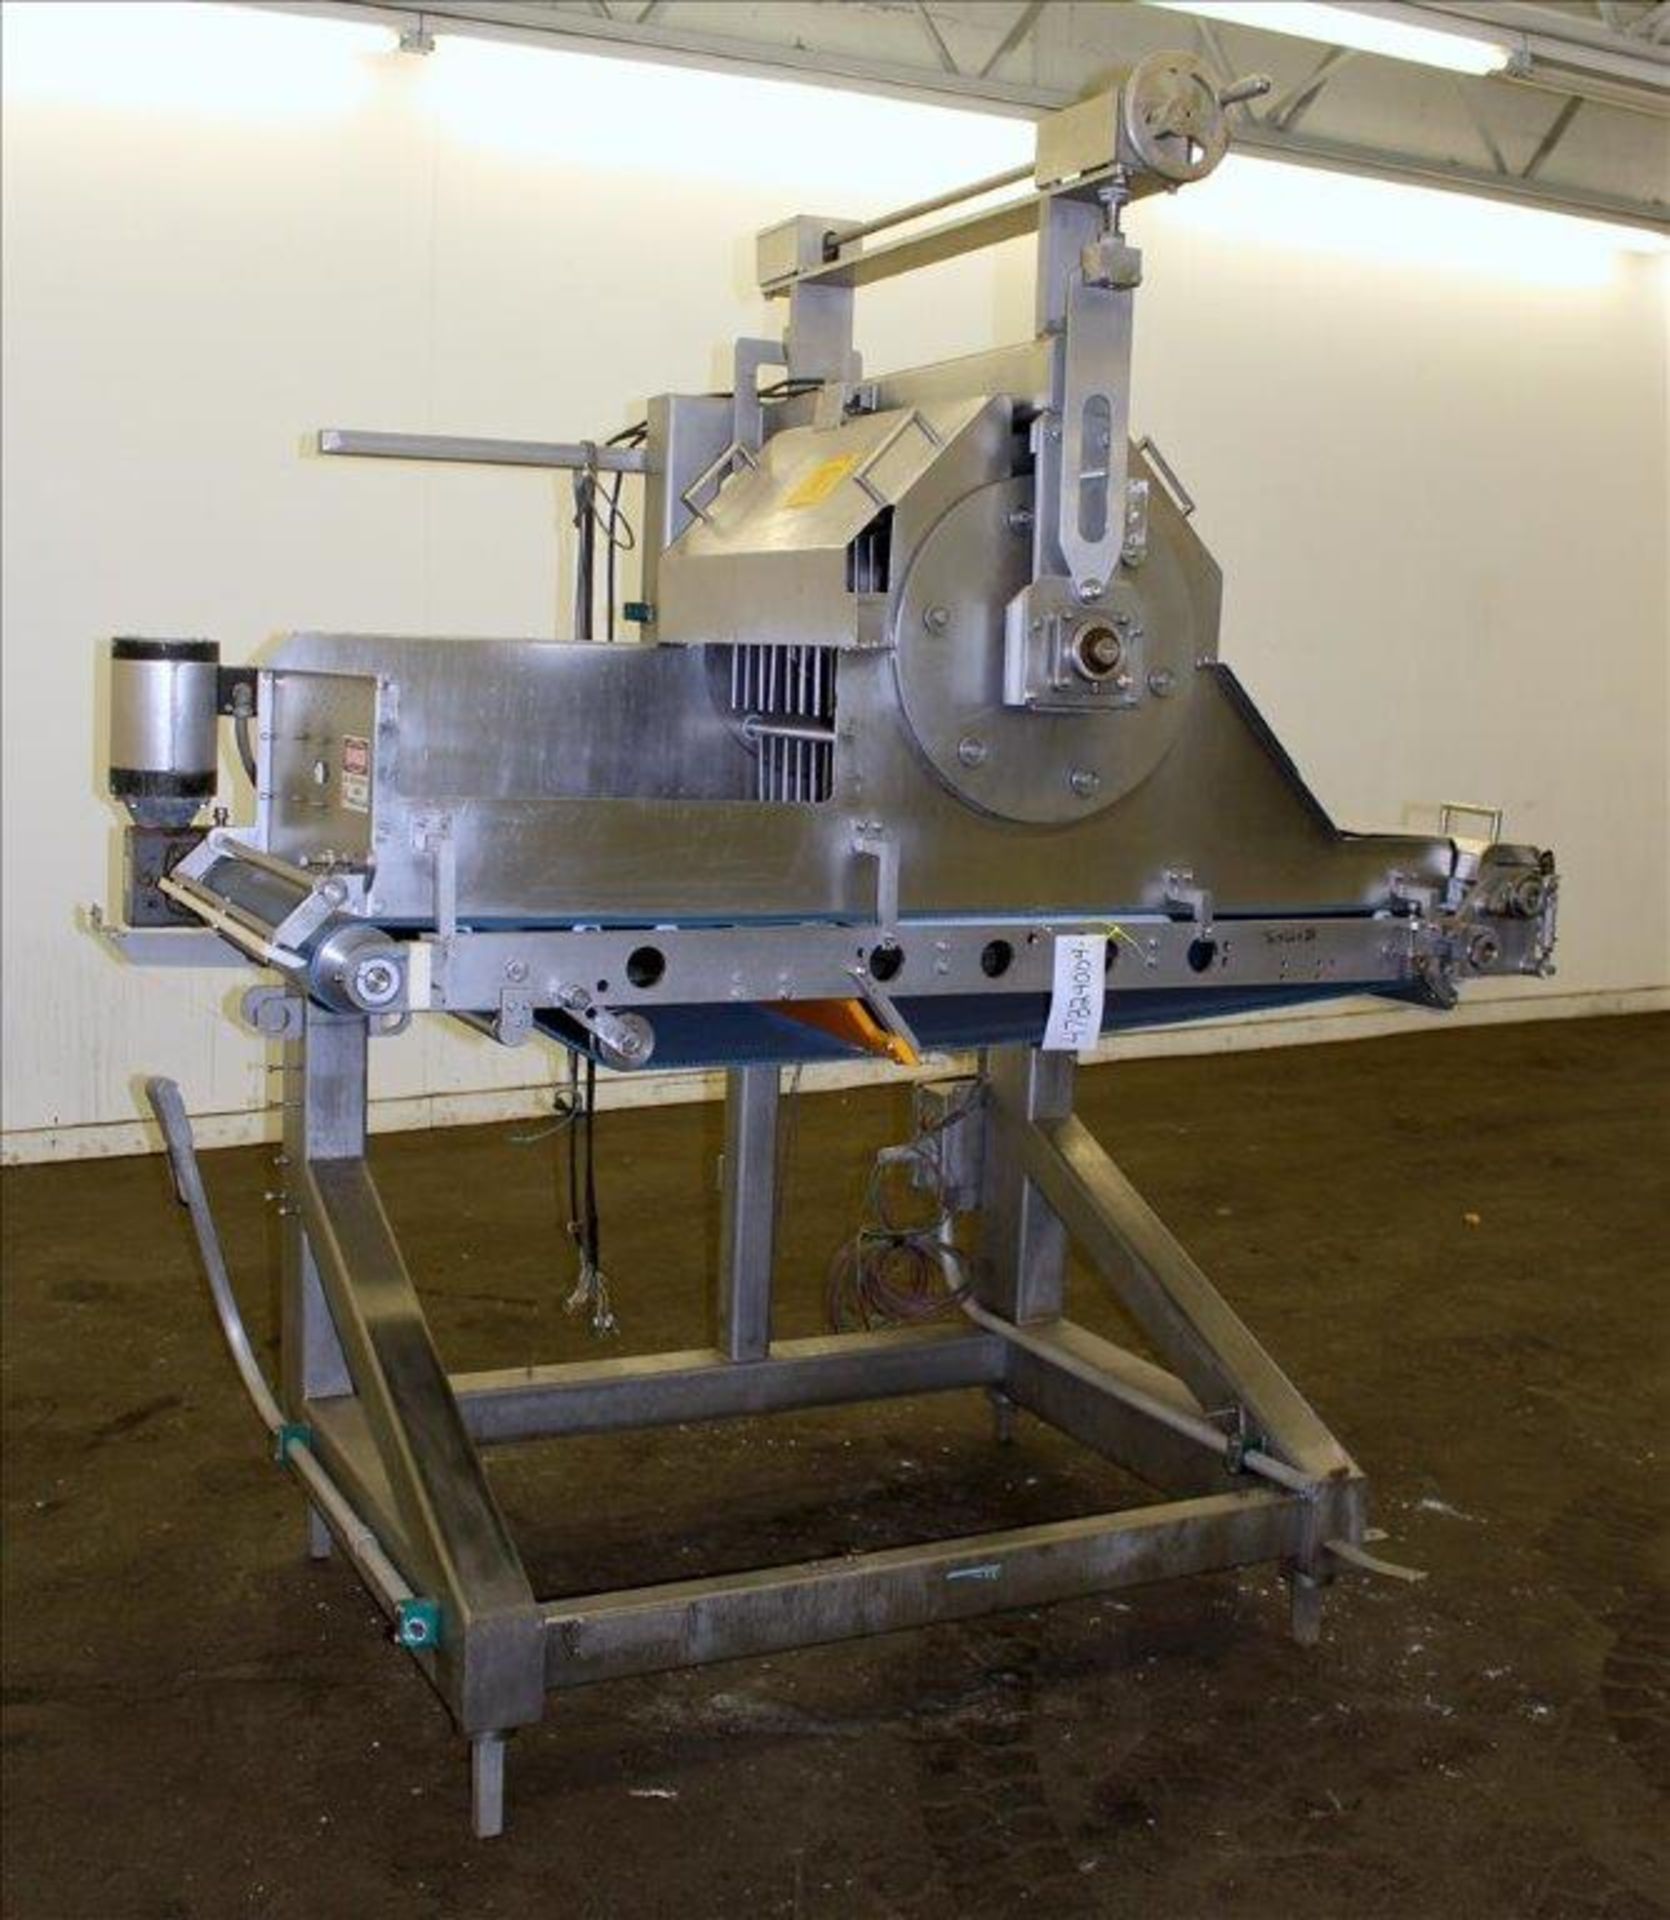 Waterfall Cheese/Applicator for Pizza, 304 Stainless Steel. Has 28" wide x 60" long belt conveyor